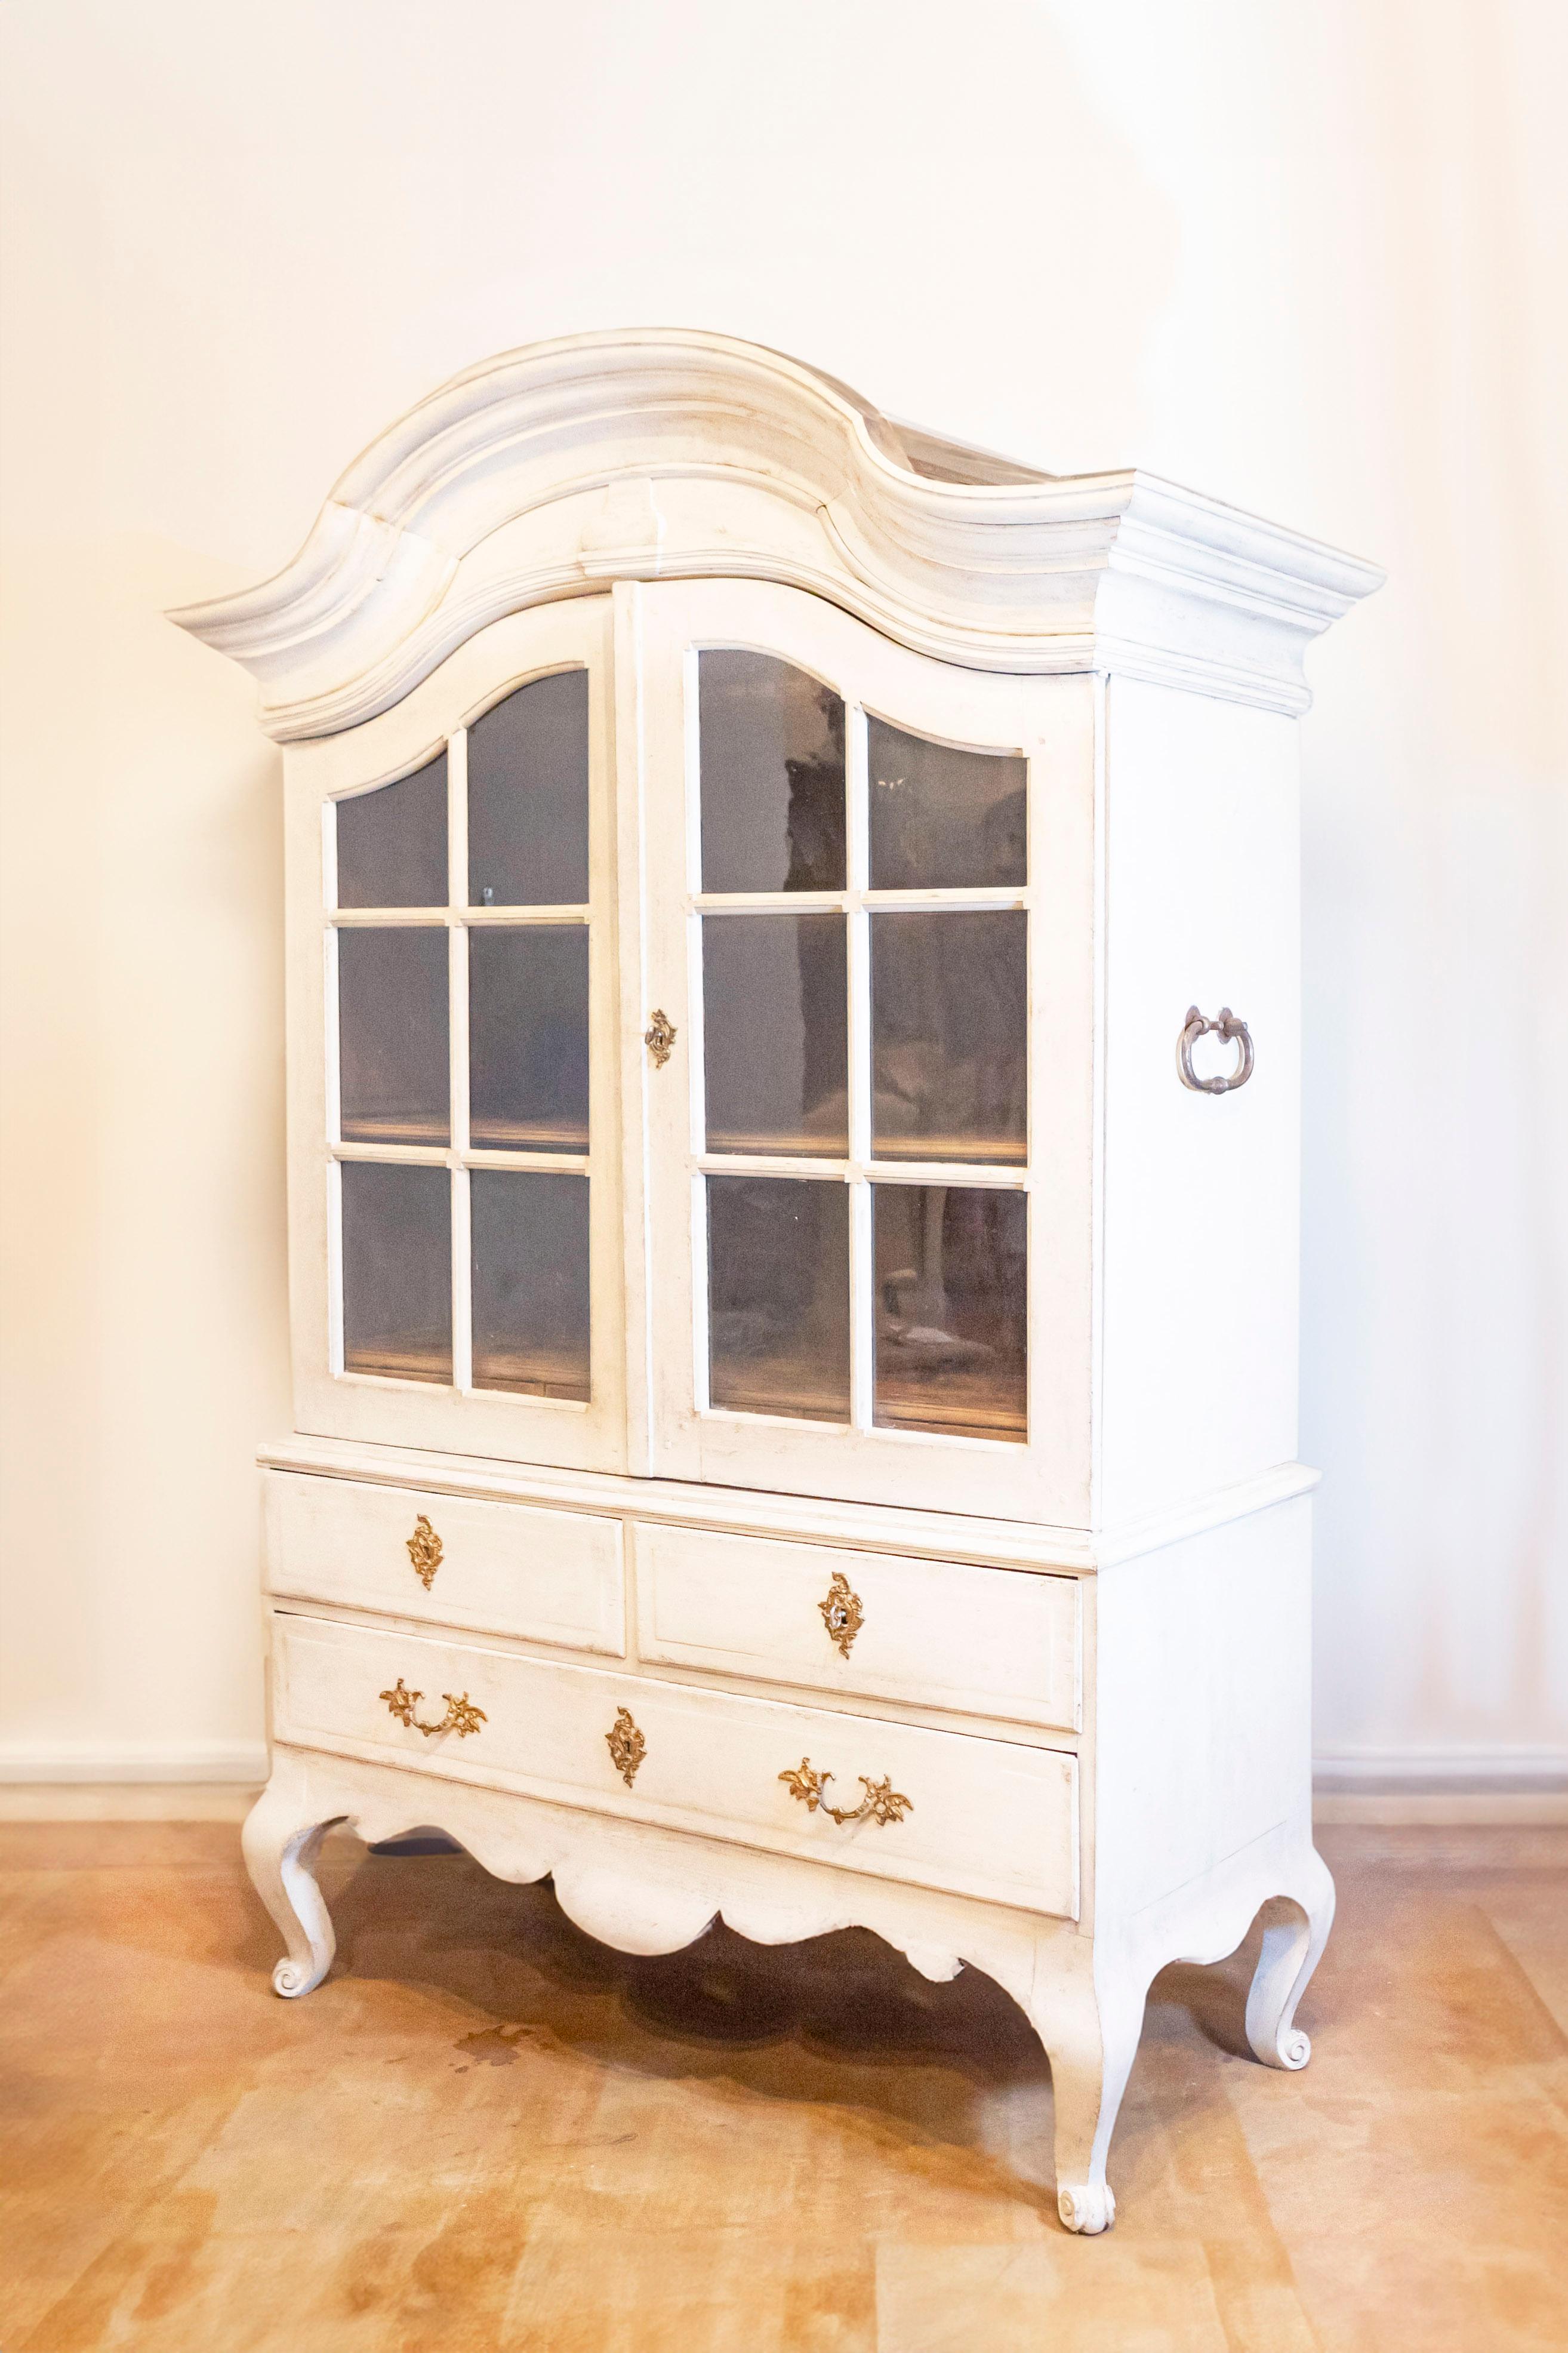 1760s Period Rococo Swedish Cabinet with Glass Doors, Bonnet Top and Cabrioles For Sale 2